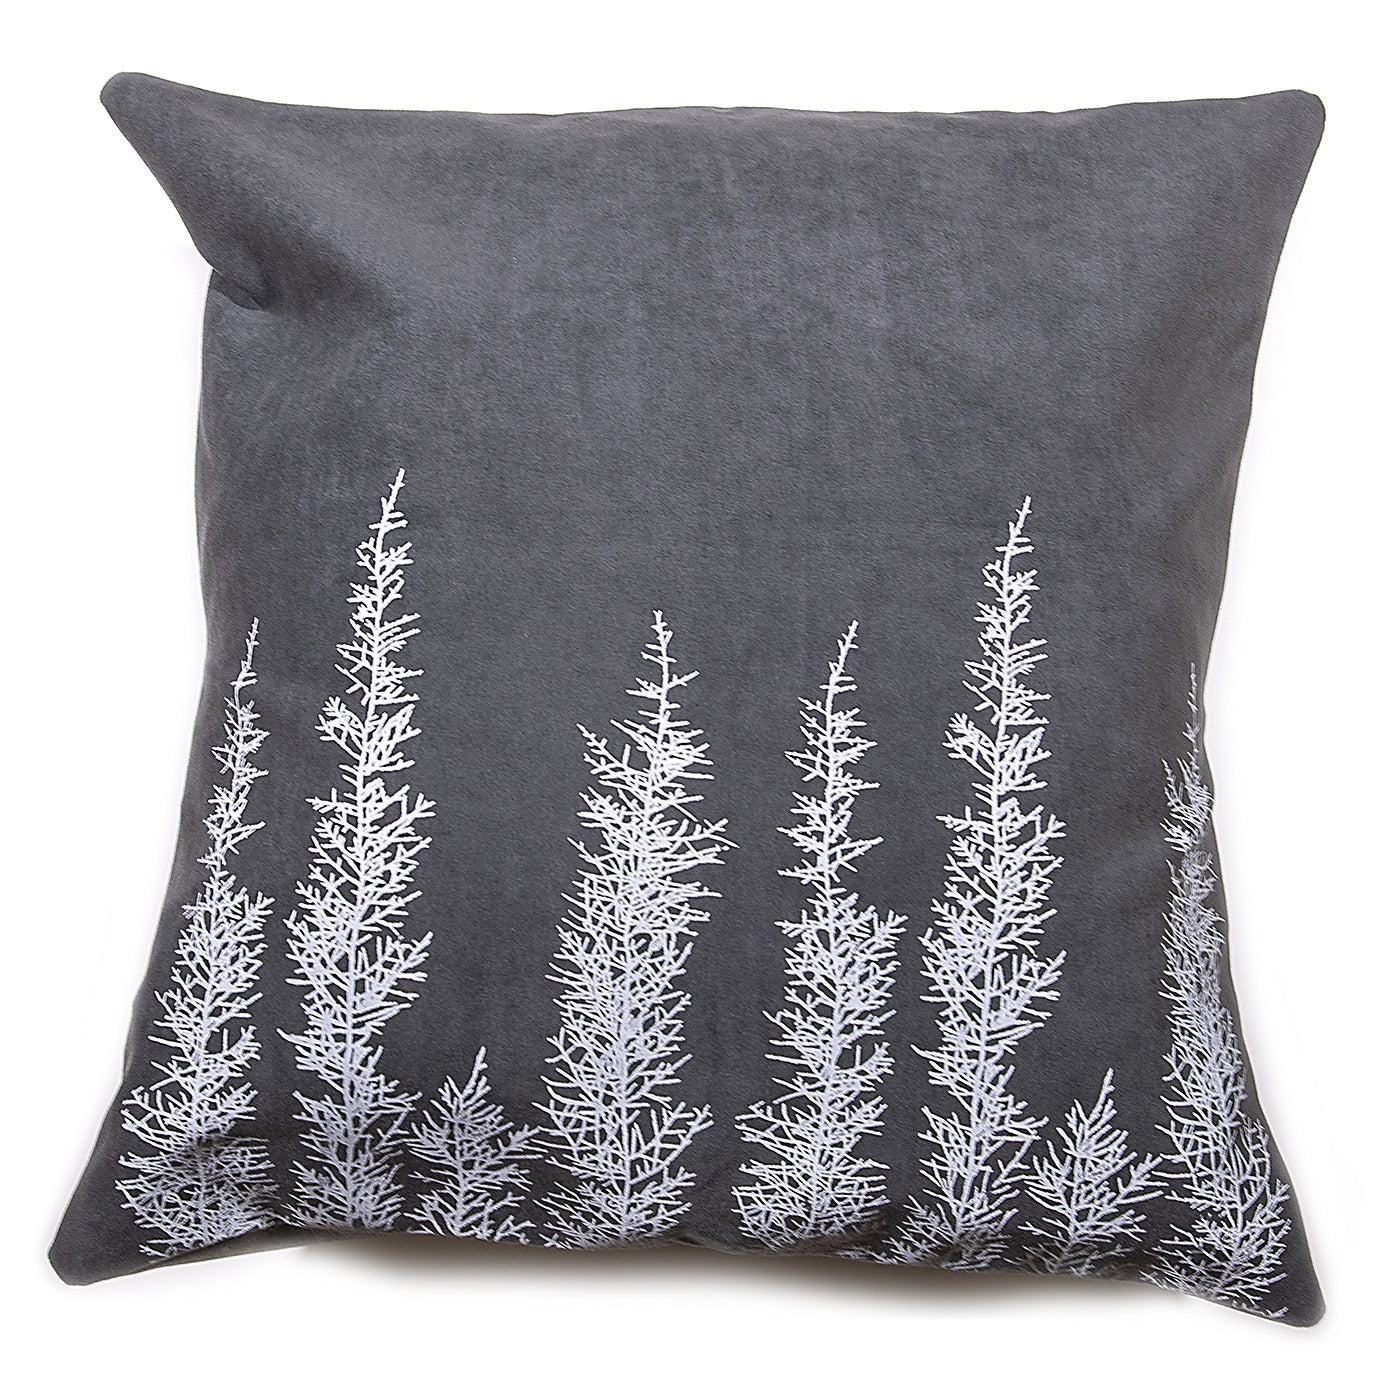 Stalley Textile Co. - Cushion Cover - Huon Pine - White on Charcoal